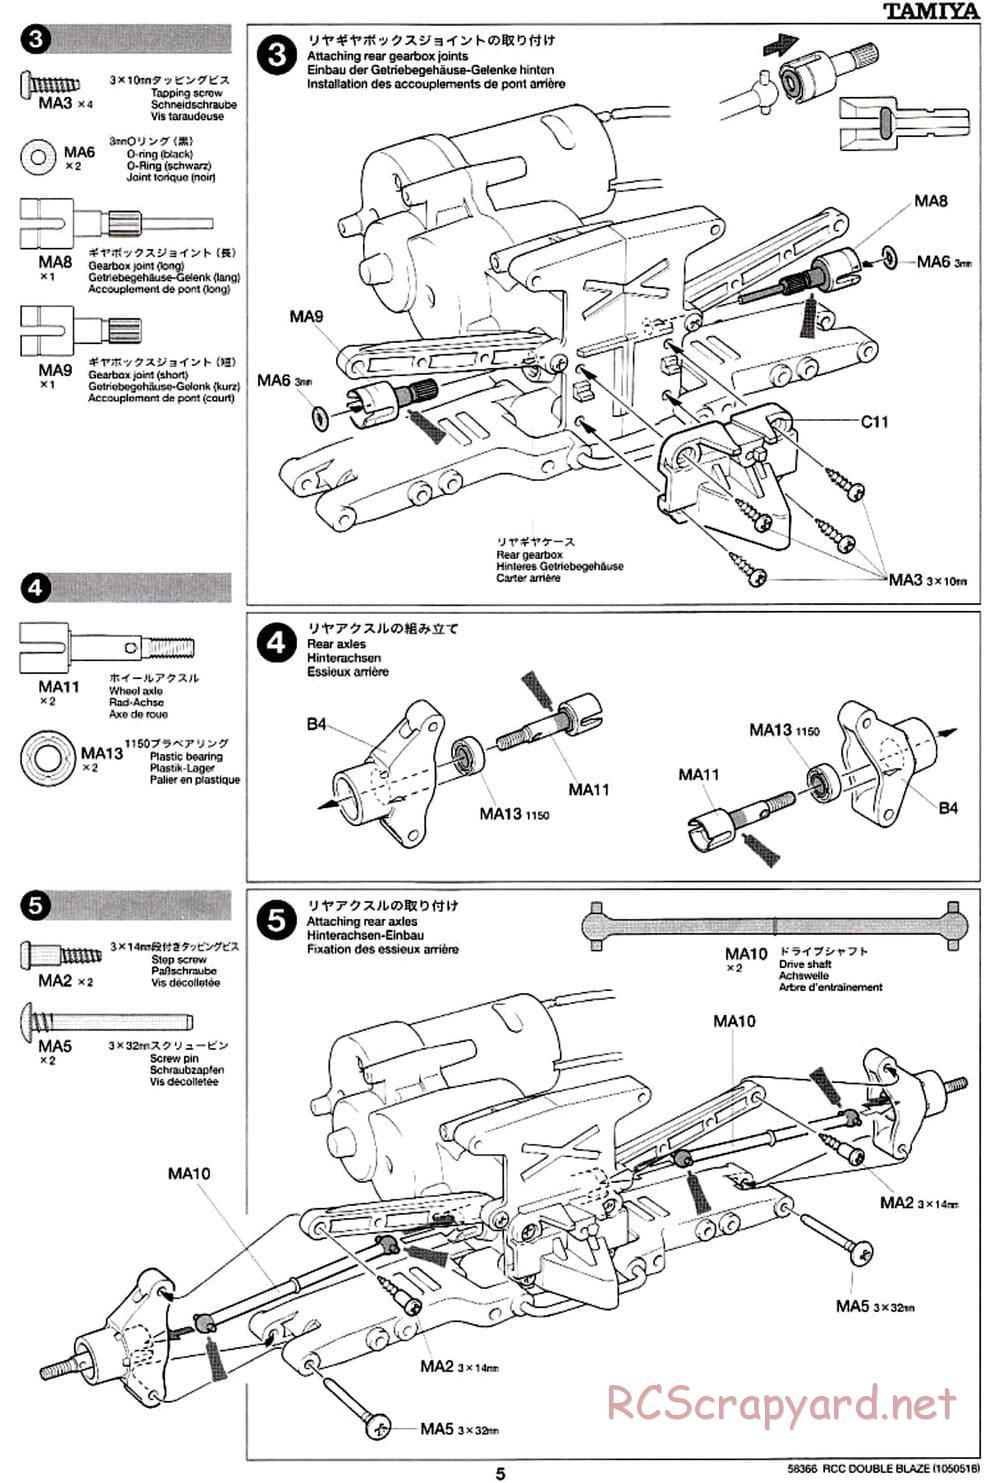 Tamiya - Double Blaze - WR-01 Chassis - Manual - Page 5